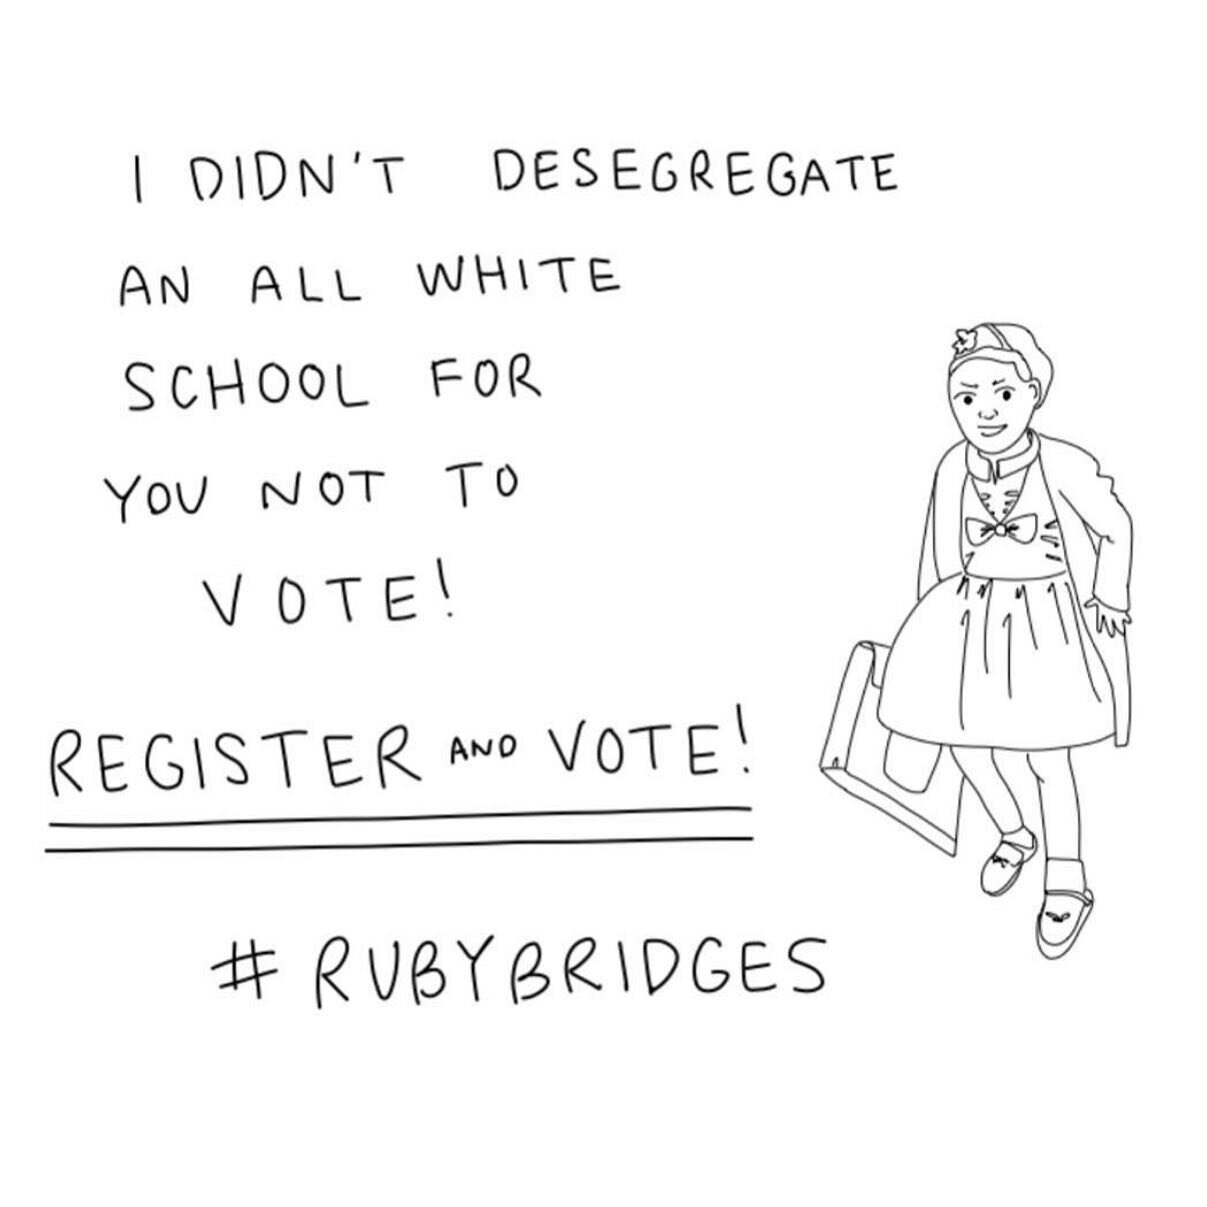 Happy birthday to a great American hero, @rubybridgesofficial! Thanks for the reminder @ashleyaubra ! Remember to register to vote! And remind your friends, too!! ❤️🇺🇸💙
#rubybridges #marvinandtaco #postcardswithapurpose